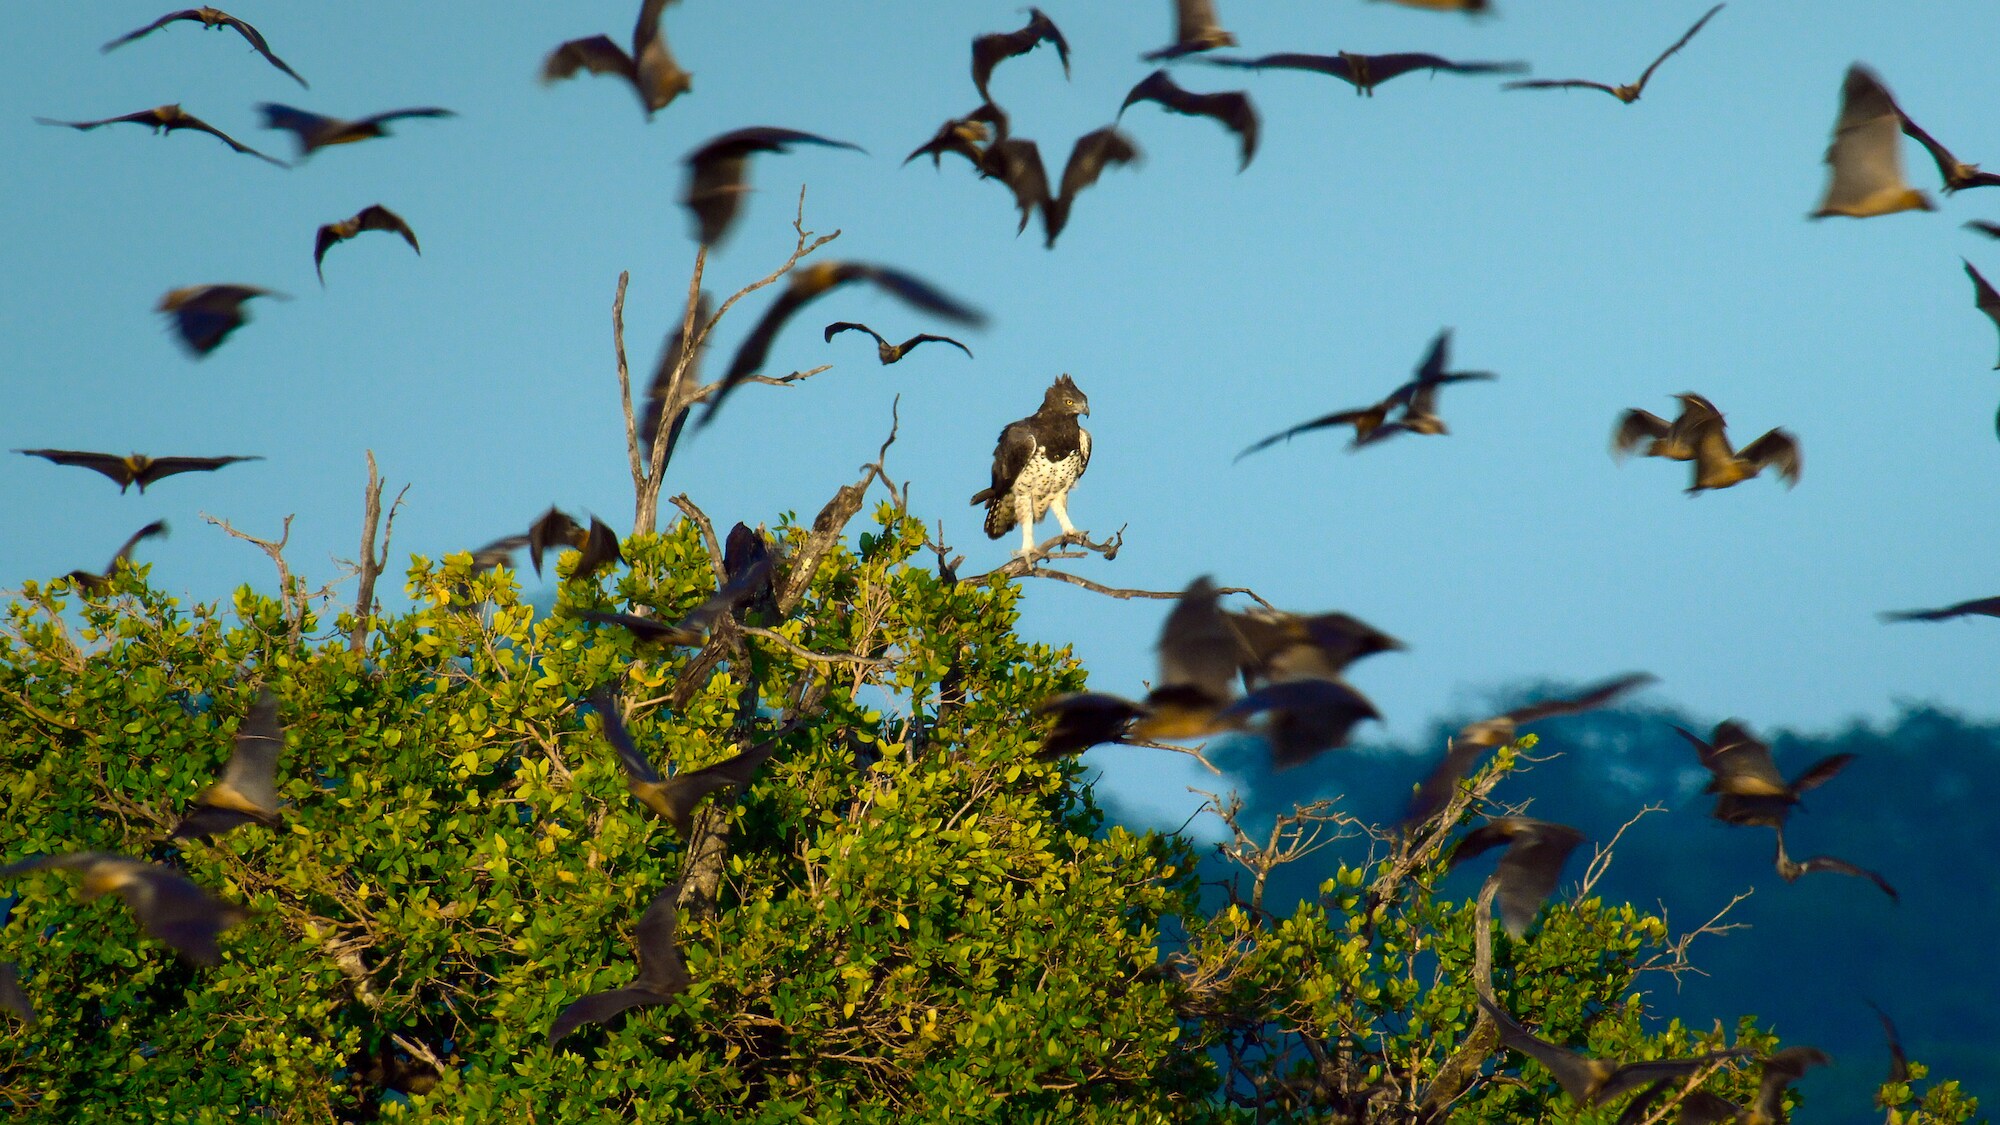 Crowned eagle perched over the bat forest, surrounded by fruit bats. (Credit: National Geographic for Disney+)